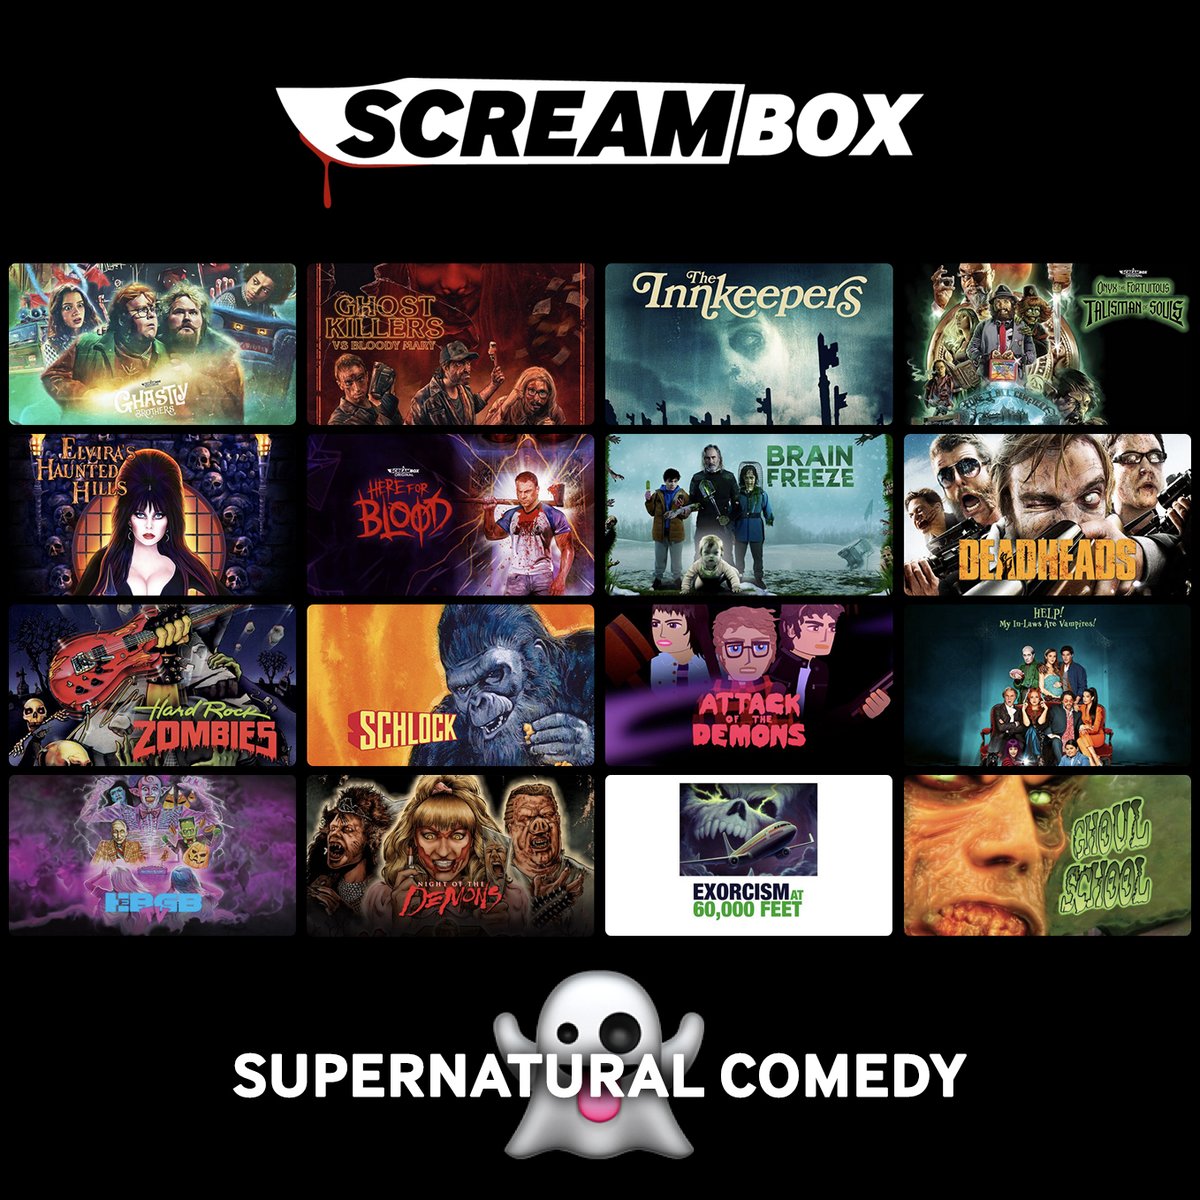 Can't wait for #Ghostbusters: Frozen Empire or #Beetlejuice 2? Bust into SCREAMBOX's Supernatural Comedy shelf for nonstop ghastly fun!